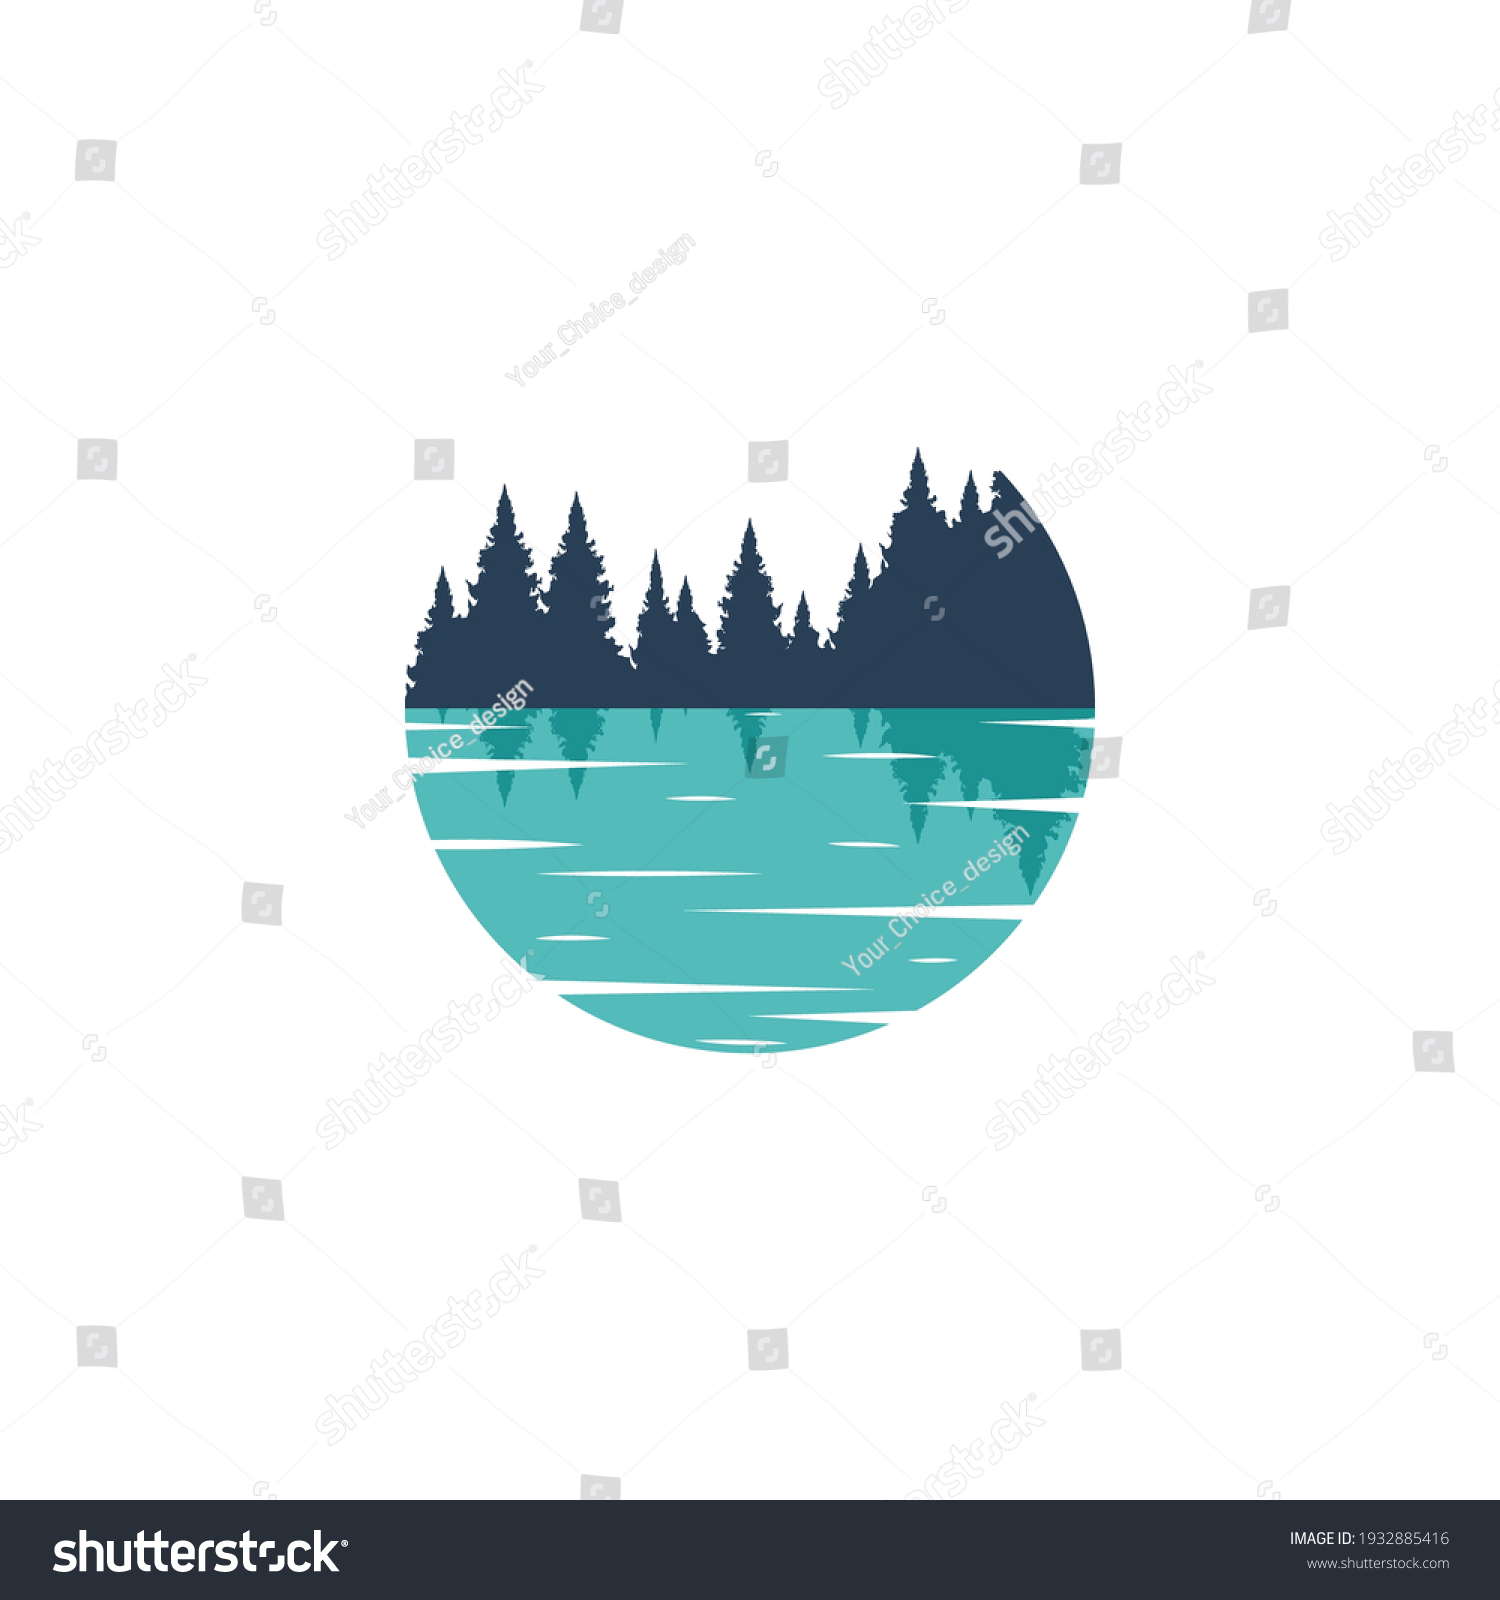 Vector circle Lake logo template. Illustration of a blue, azure lake with the silhouette of a forest. Reflection of the forest in the water. #1932885416